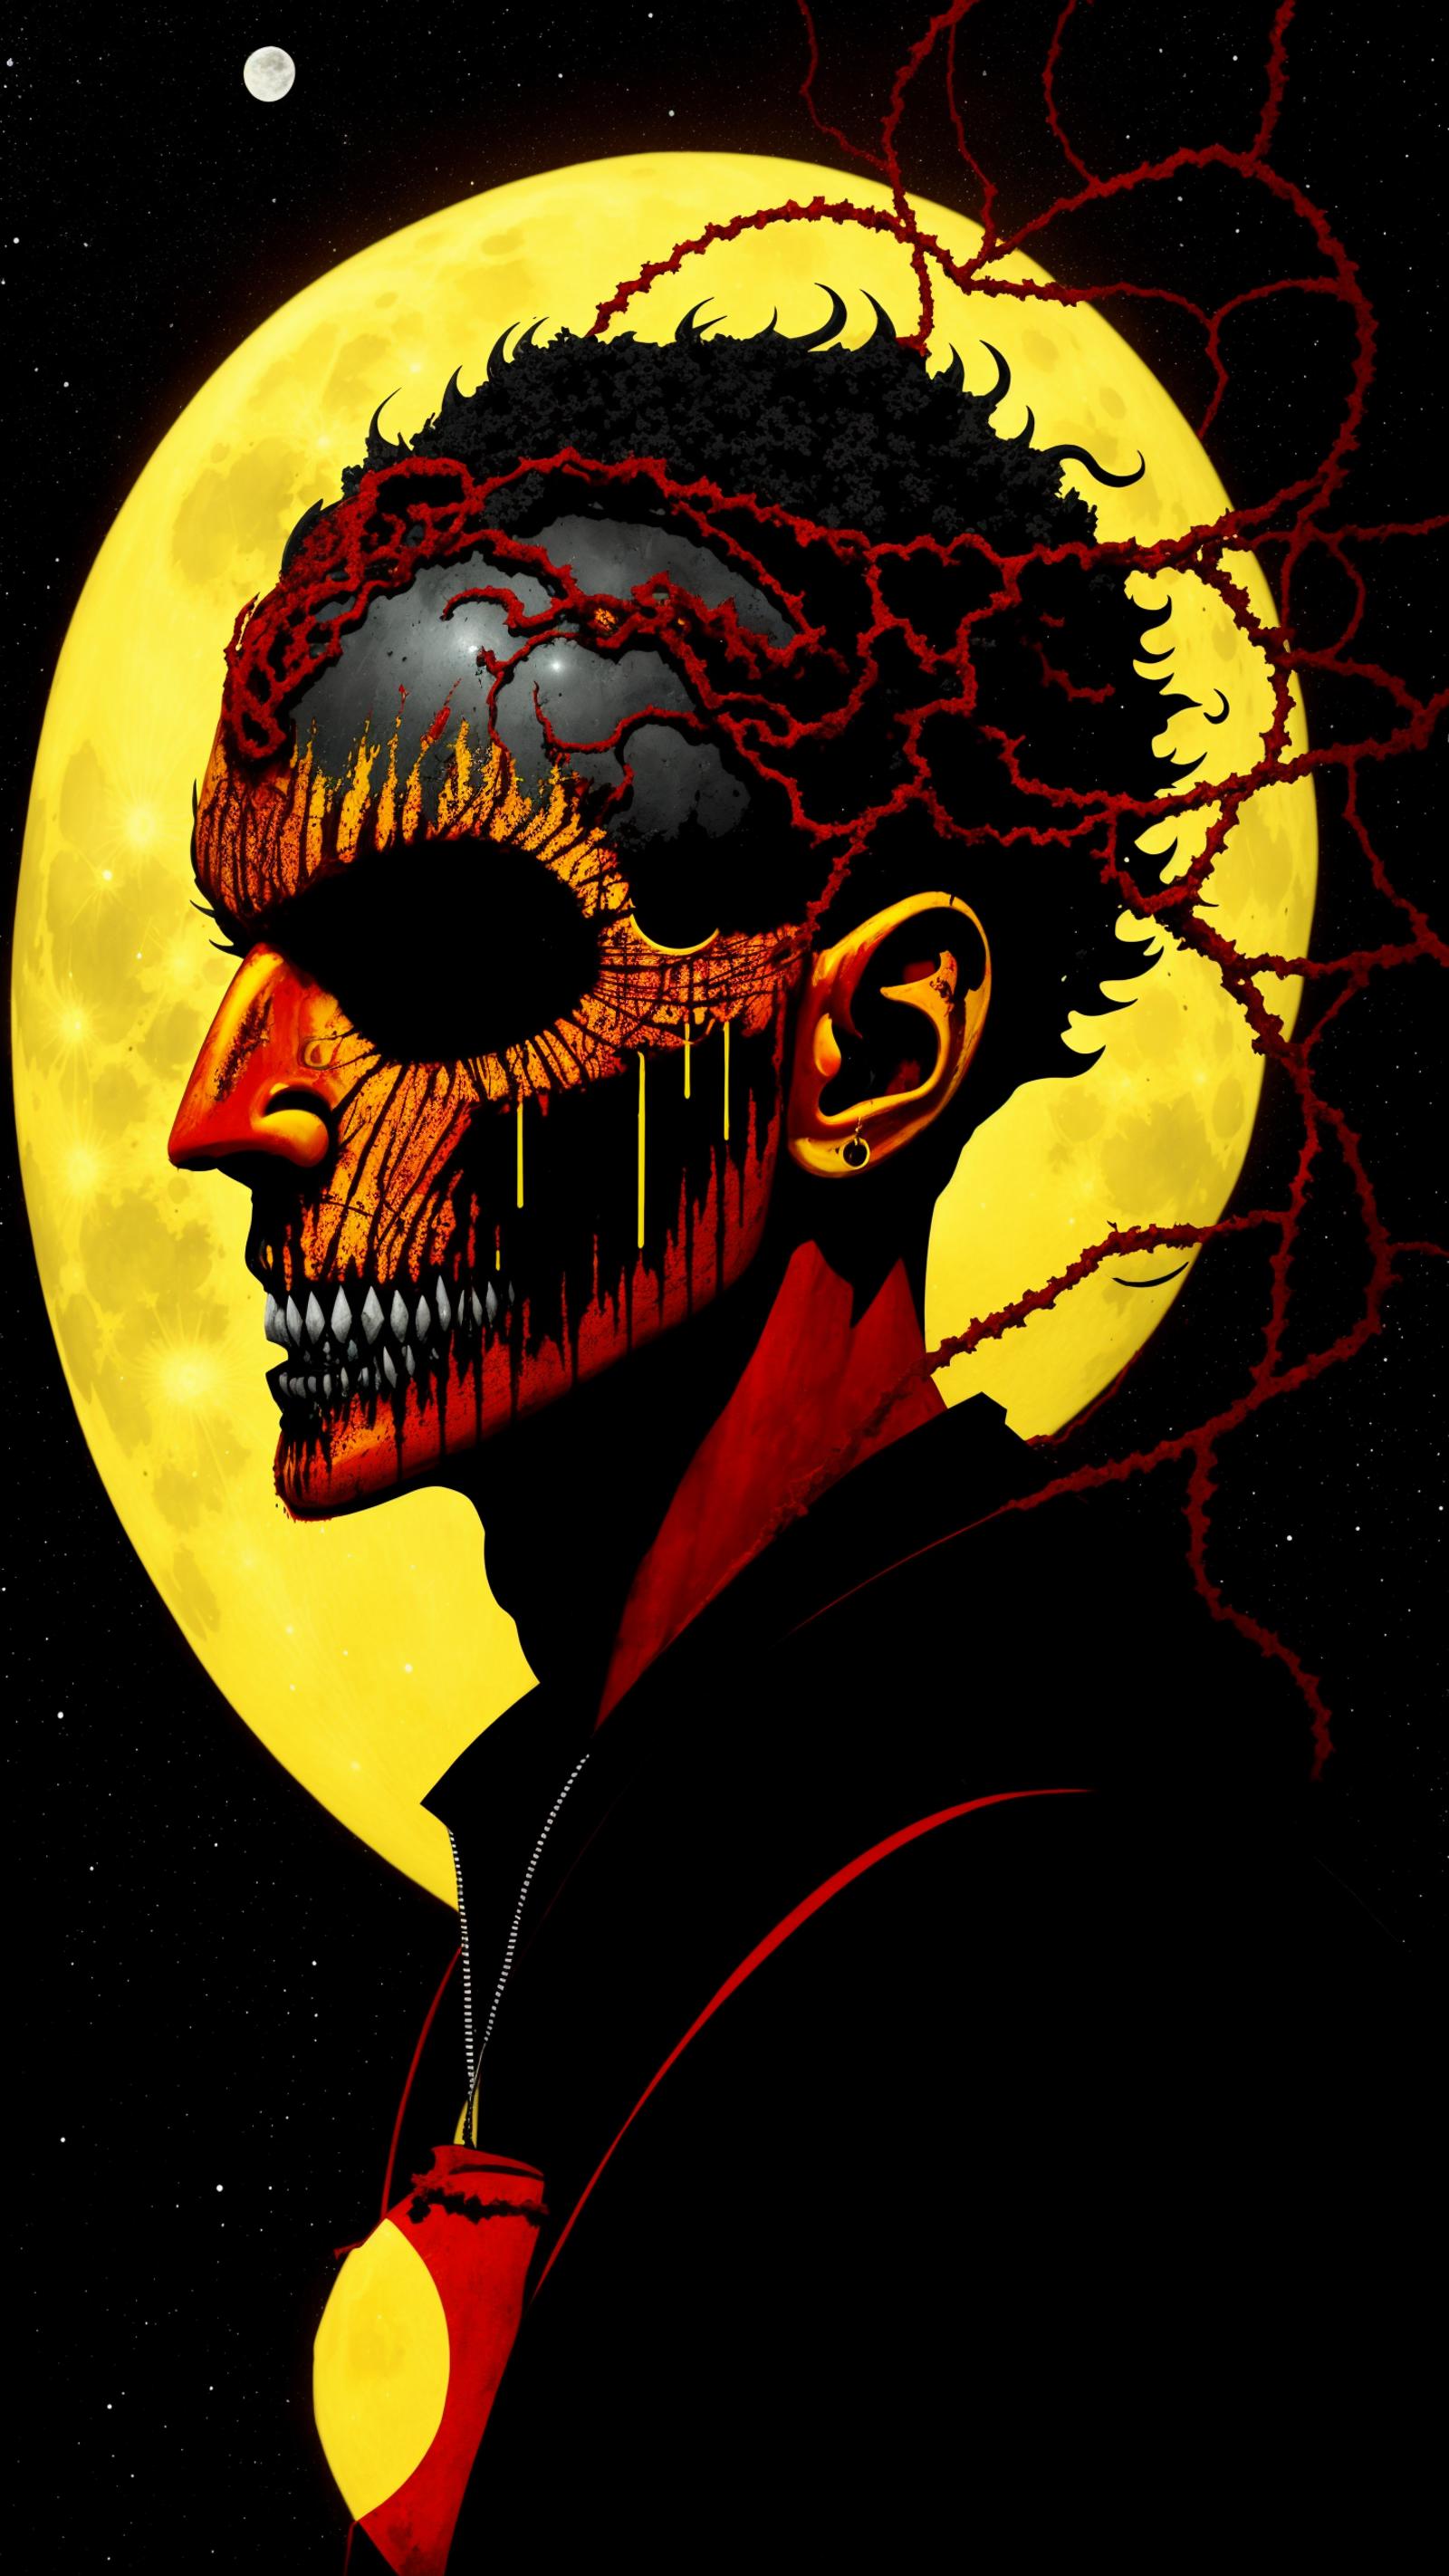 A scary painting of a person with a clown face under a yellow moon.